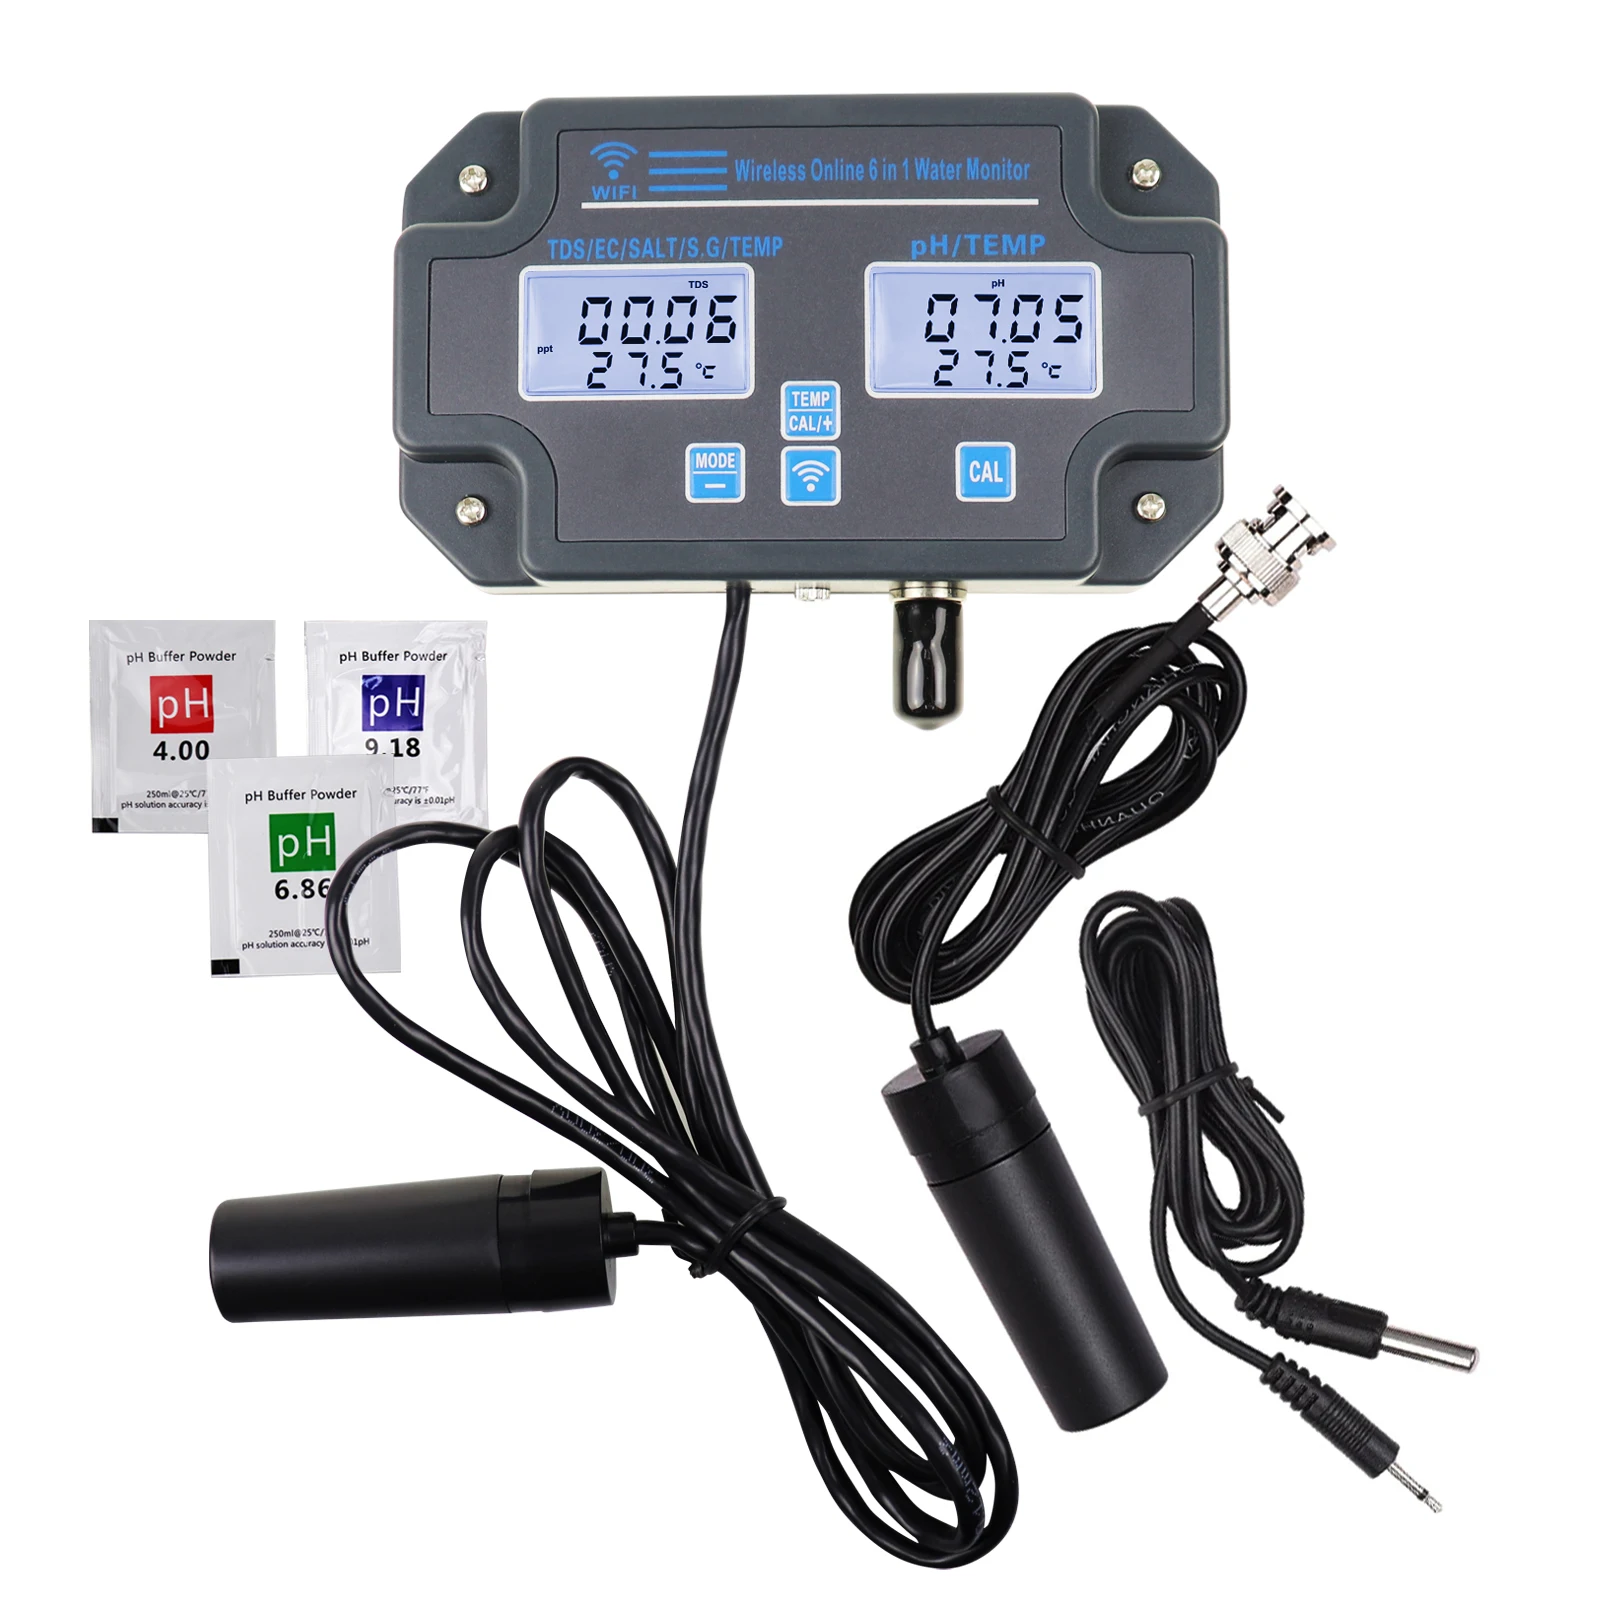 

6-in-1 Smart Water Quality Meter pH / EC / TDS / Salinity / SG / Temperature with Easy Calibration 24Hrs Online APP Monitoring